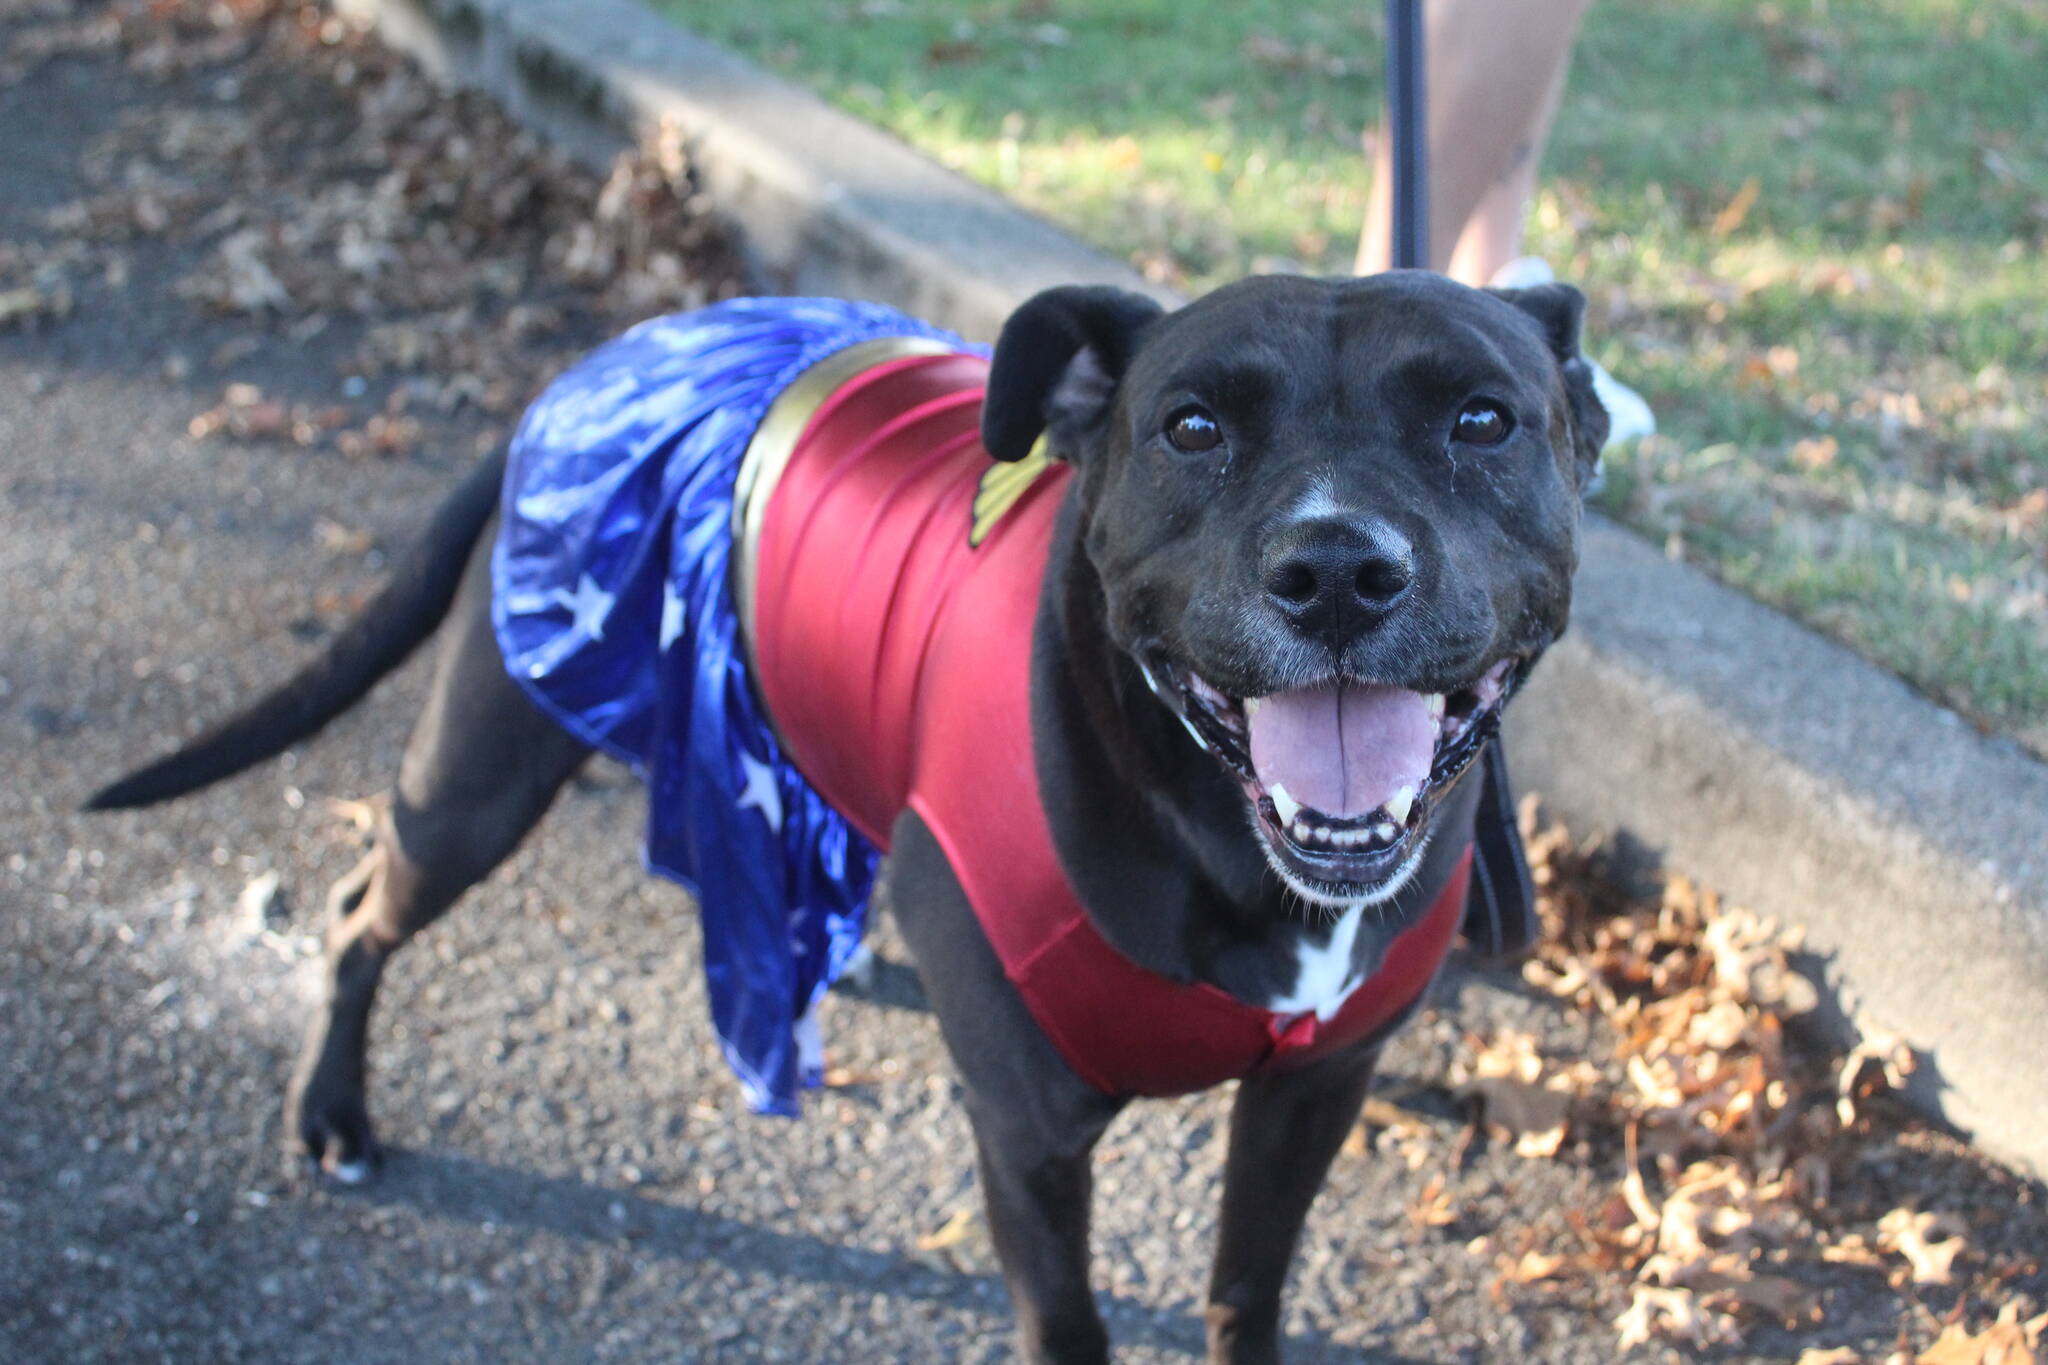 Photo by Bailey Jo Josie/Sound Publishing
Woof-Woof Wonder Woman wows at Renton’s Superhero 5k run. This year’s 5K fun run and walk will begin at 9:15 a.m. Dec. 3 at the Renton Community Center.